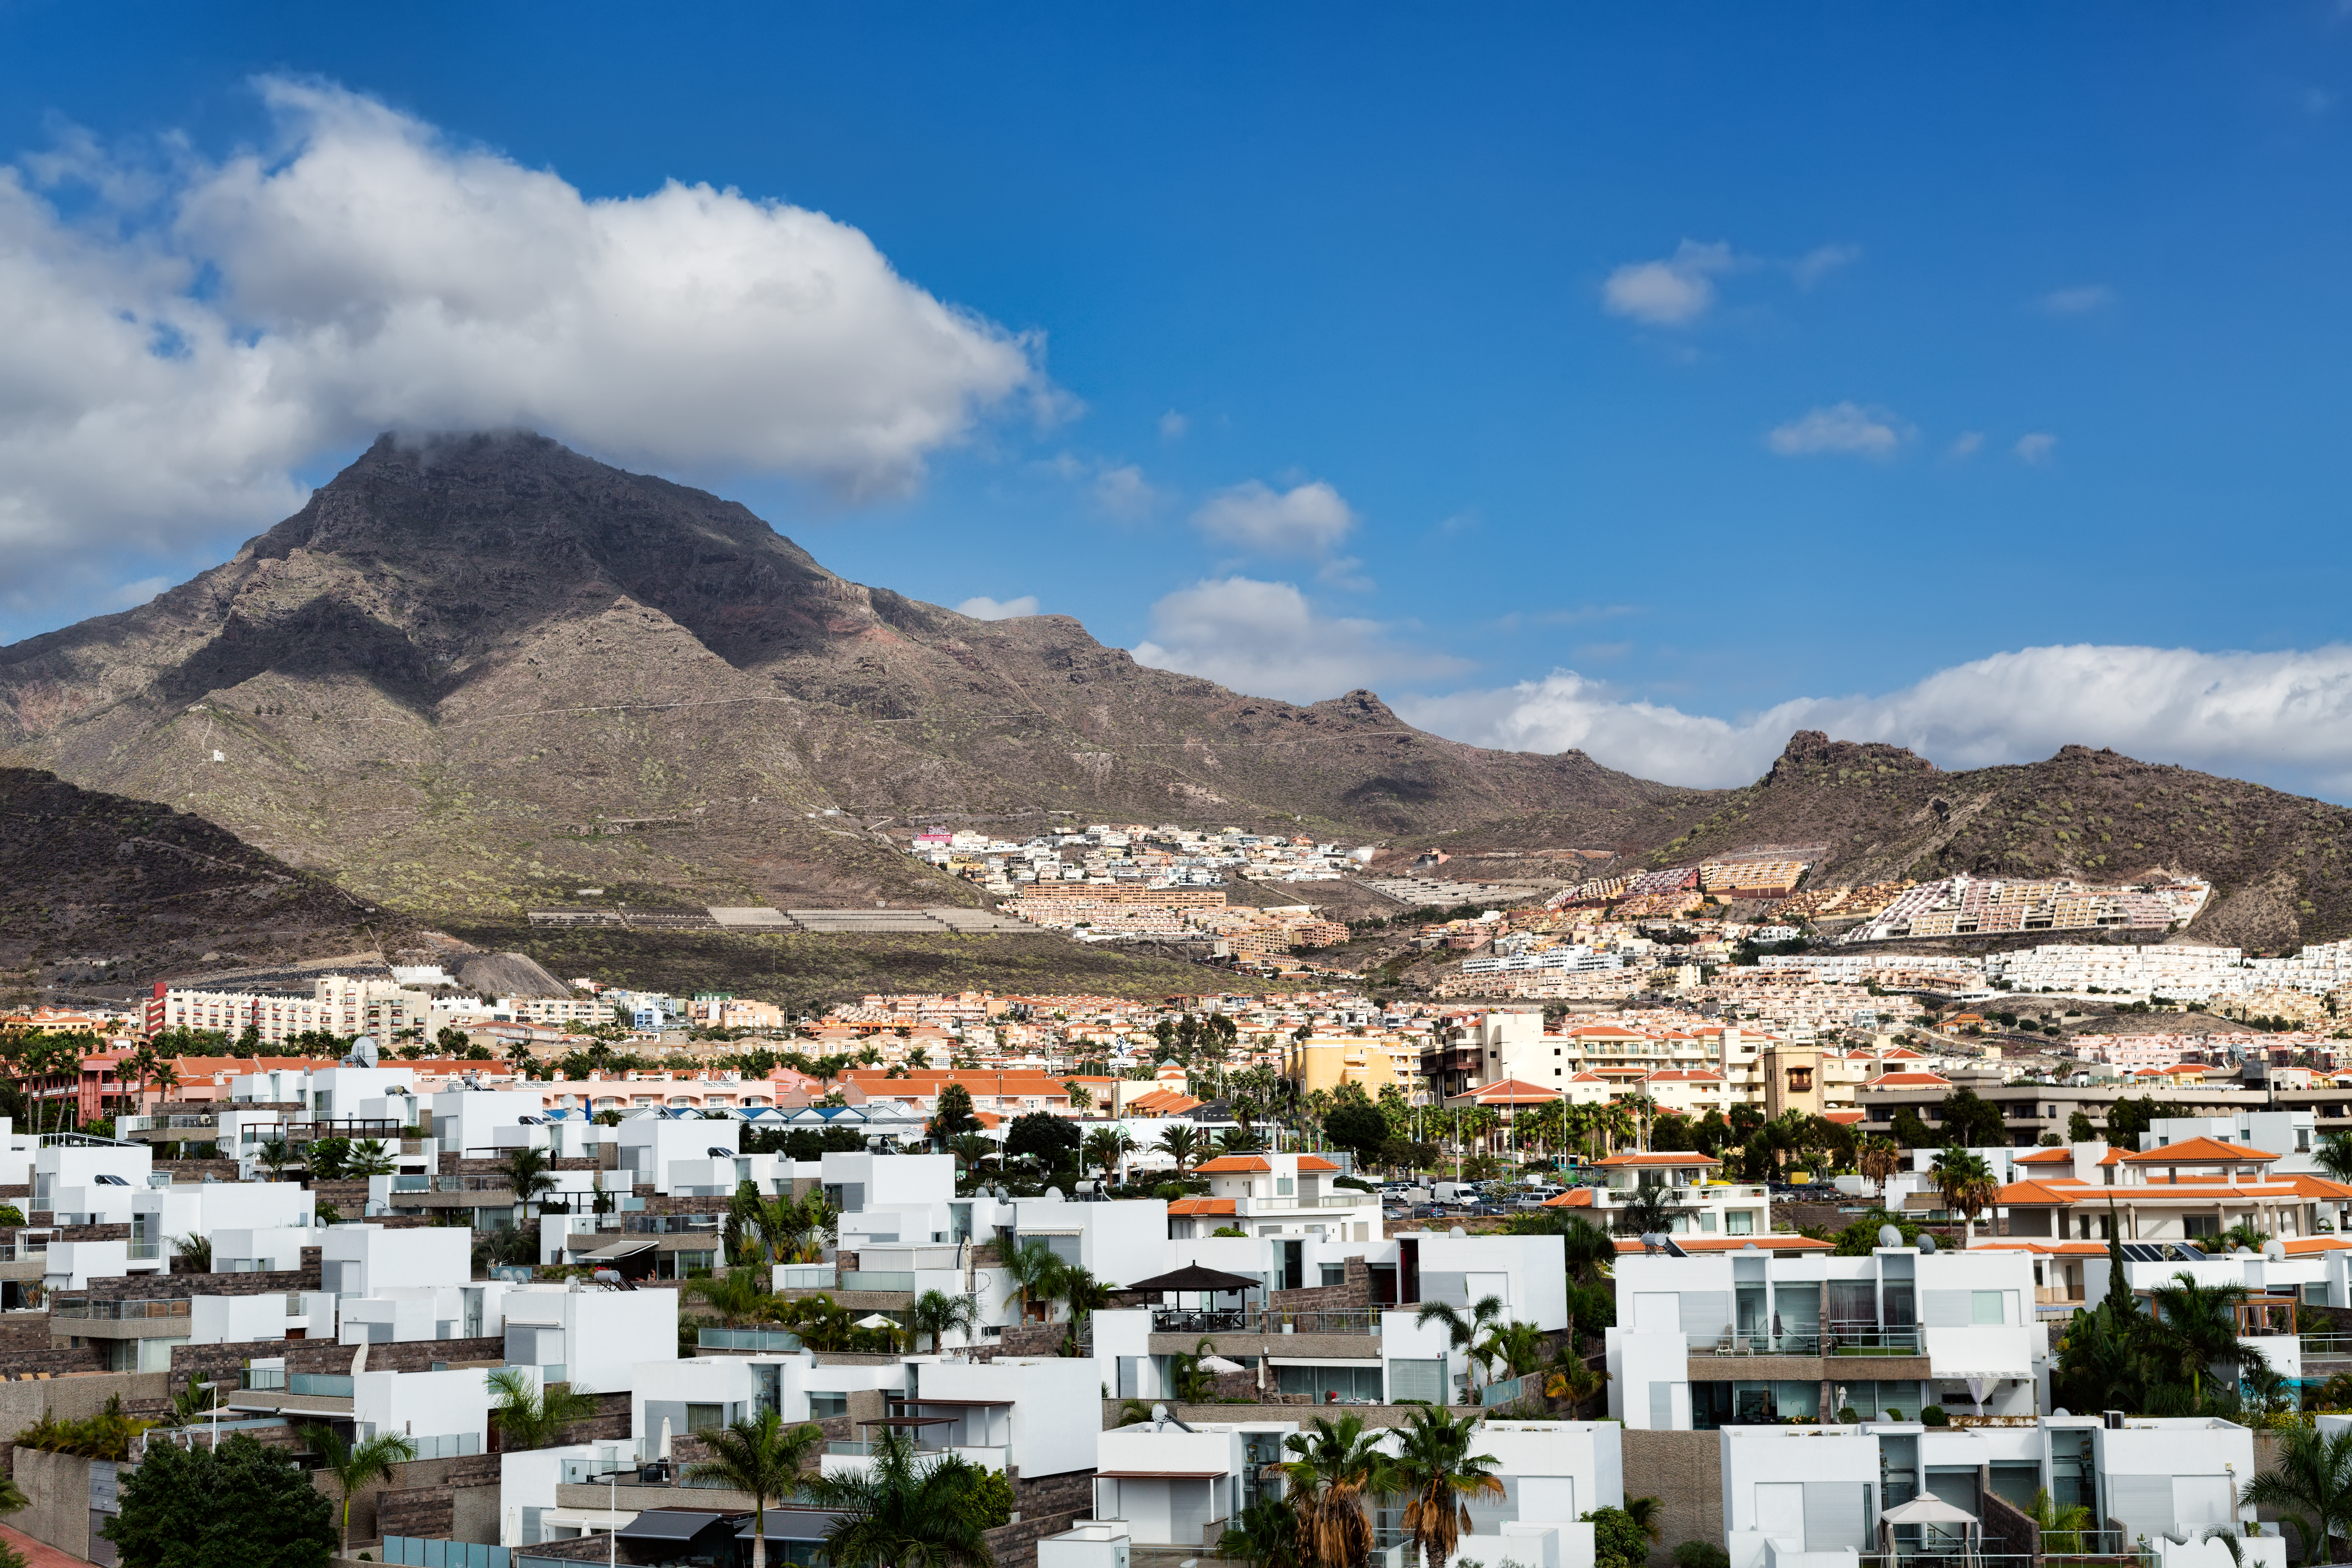 City by the volcanic Canary Islands